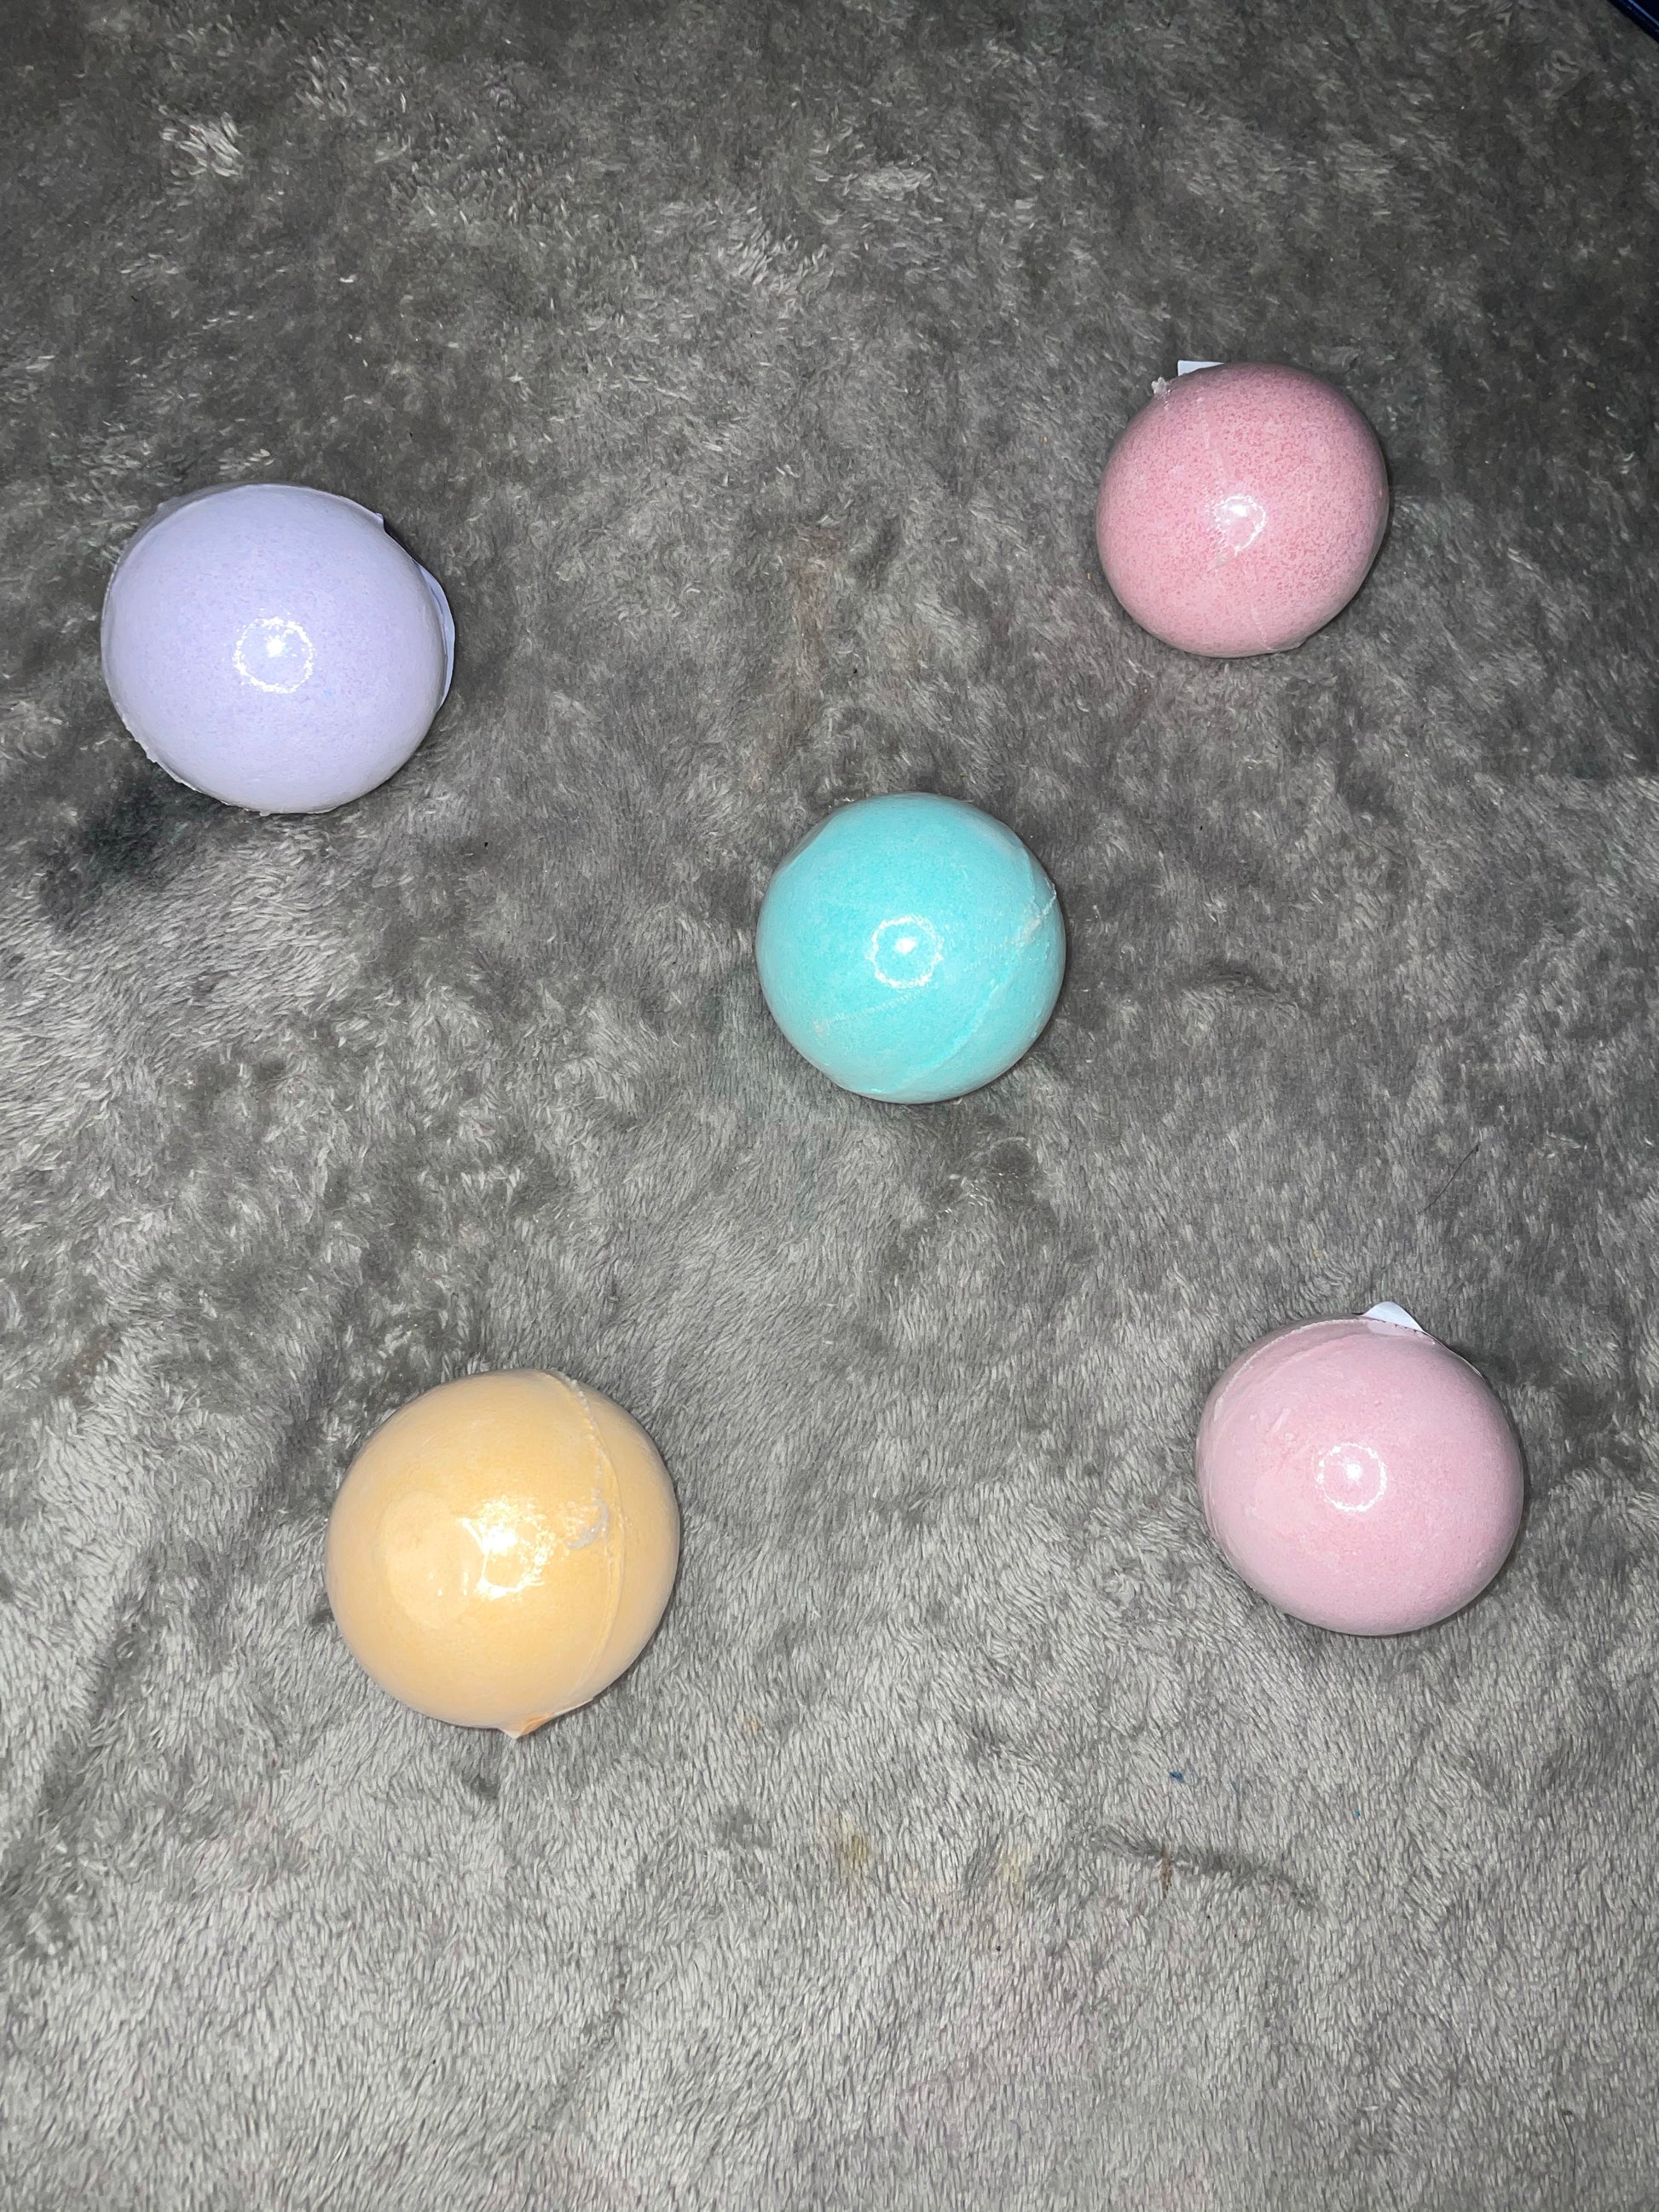 a group of different colored balls on the ground 